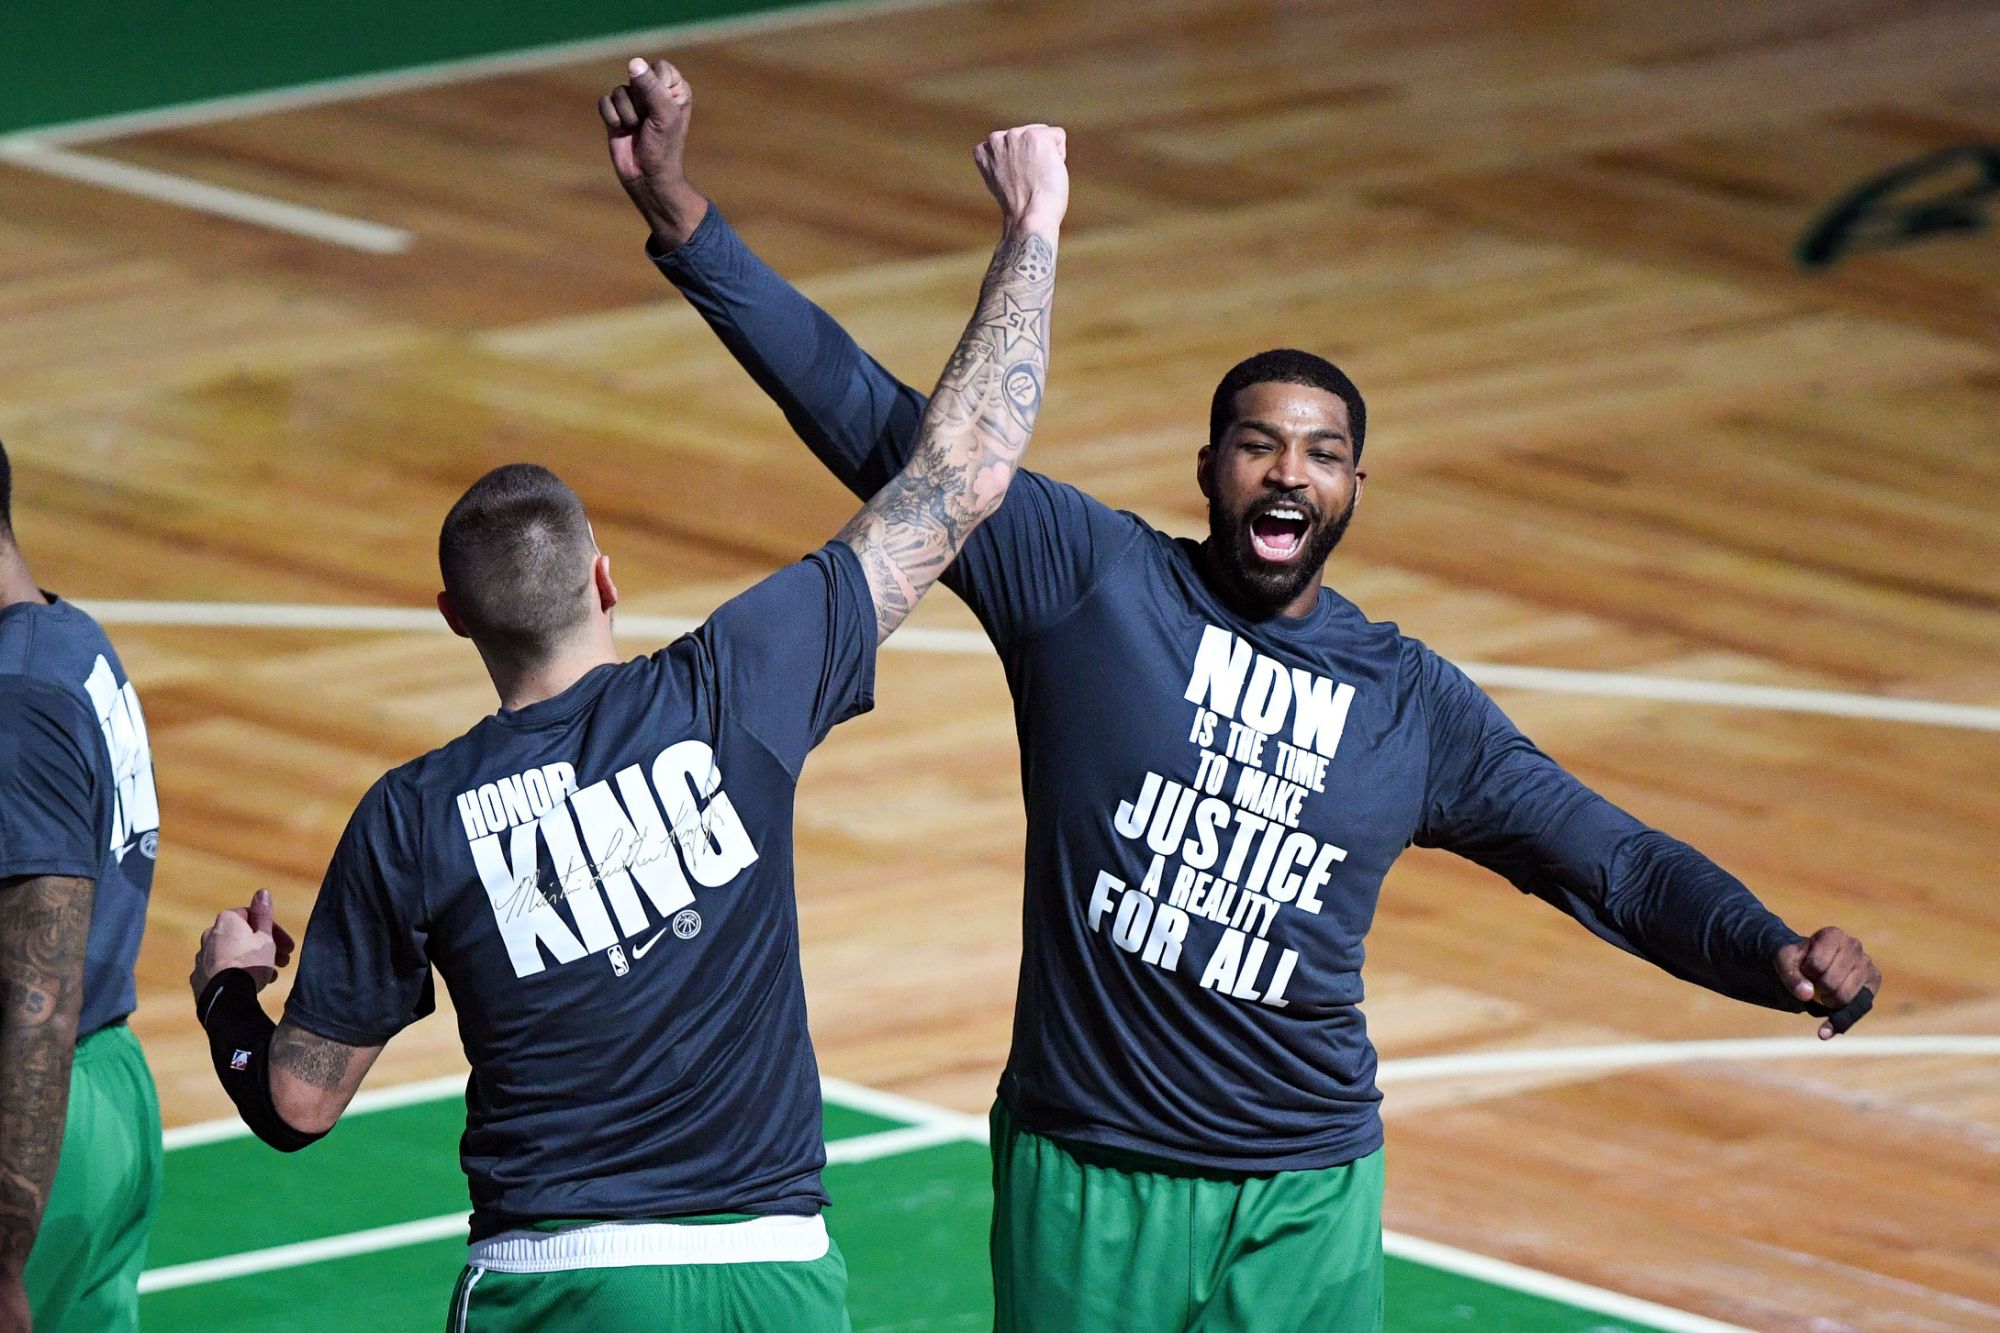 Jan 15, 2021; Boston, Massachusetts, USA; Boston Celtics forward Tristan Thompson (13) high-fives enter Daniel Theis (27) during player introductions before a game against the Orlando Magic at the TD Garden. Mandatory Credit: Brian Fluharty-USA TODAY Sports